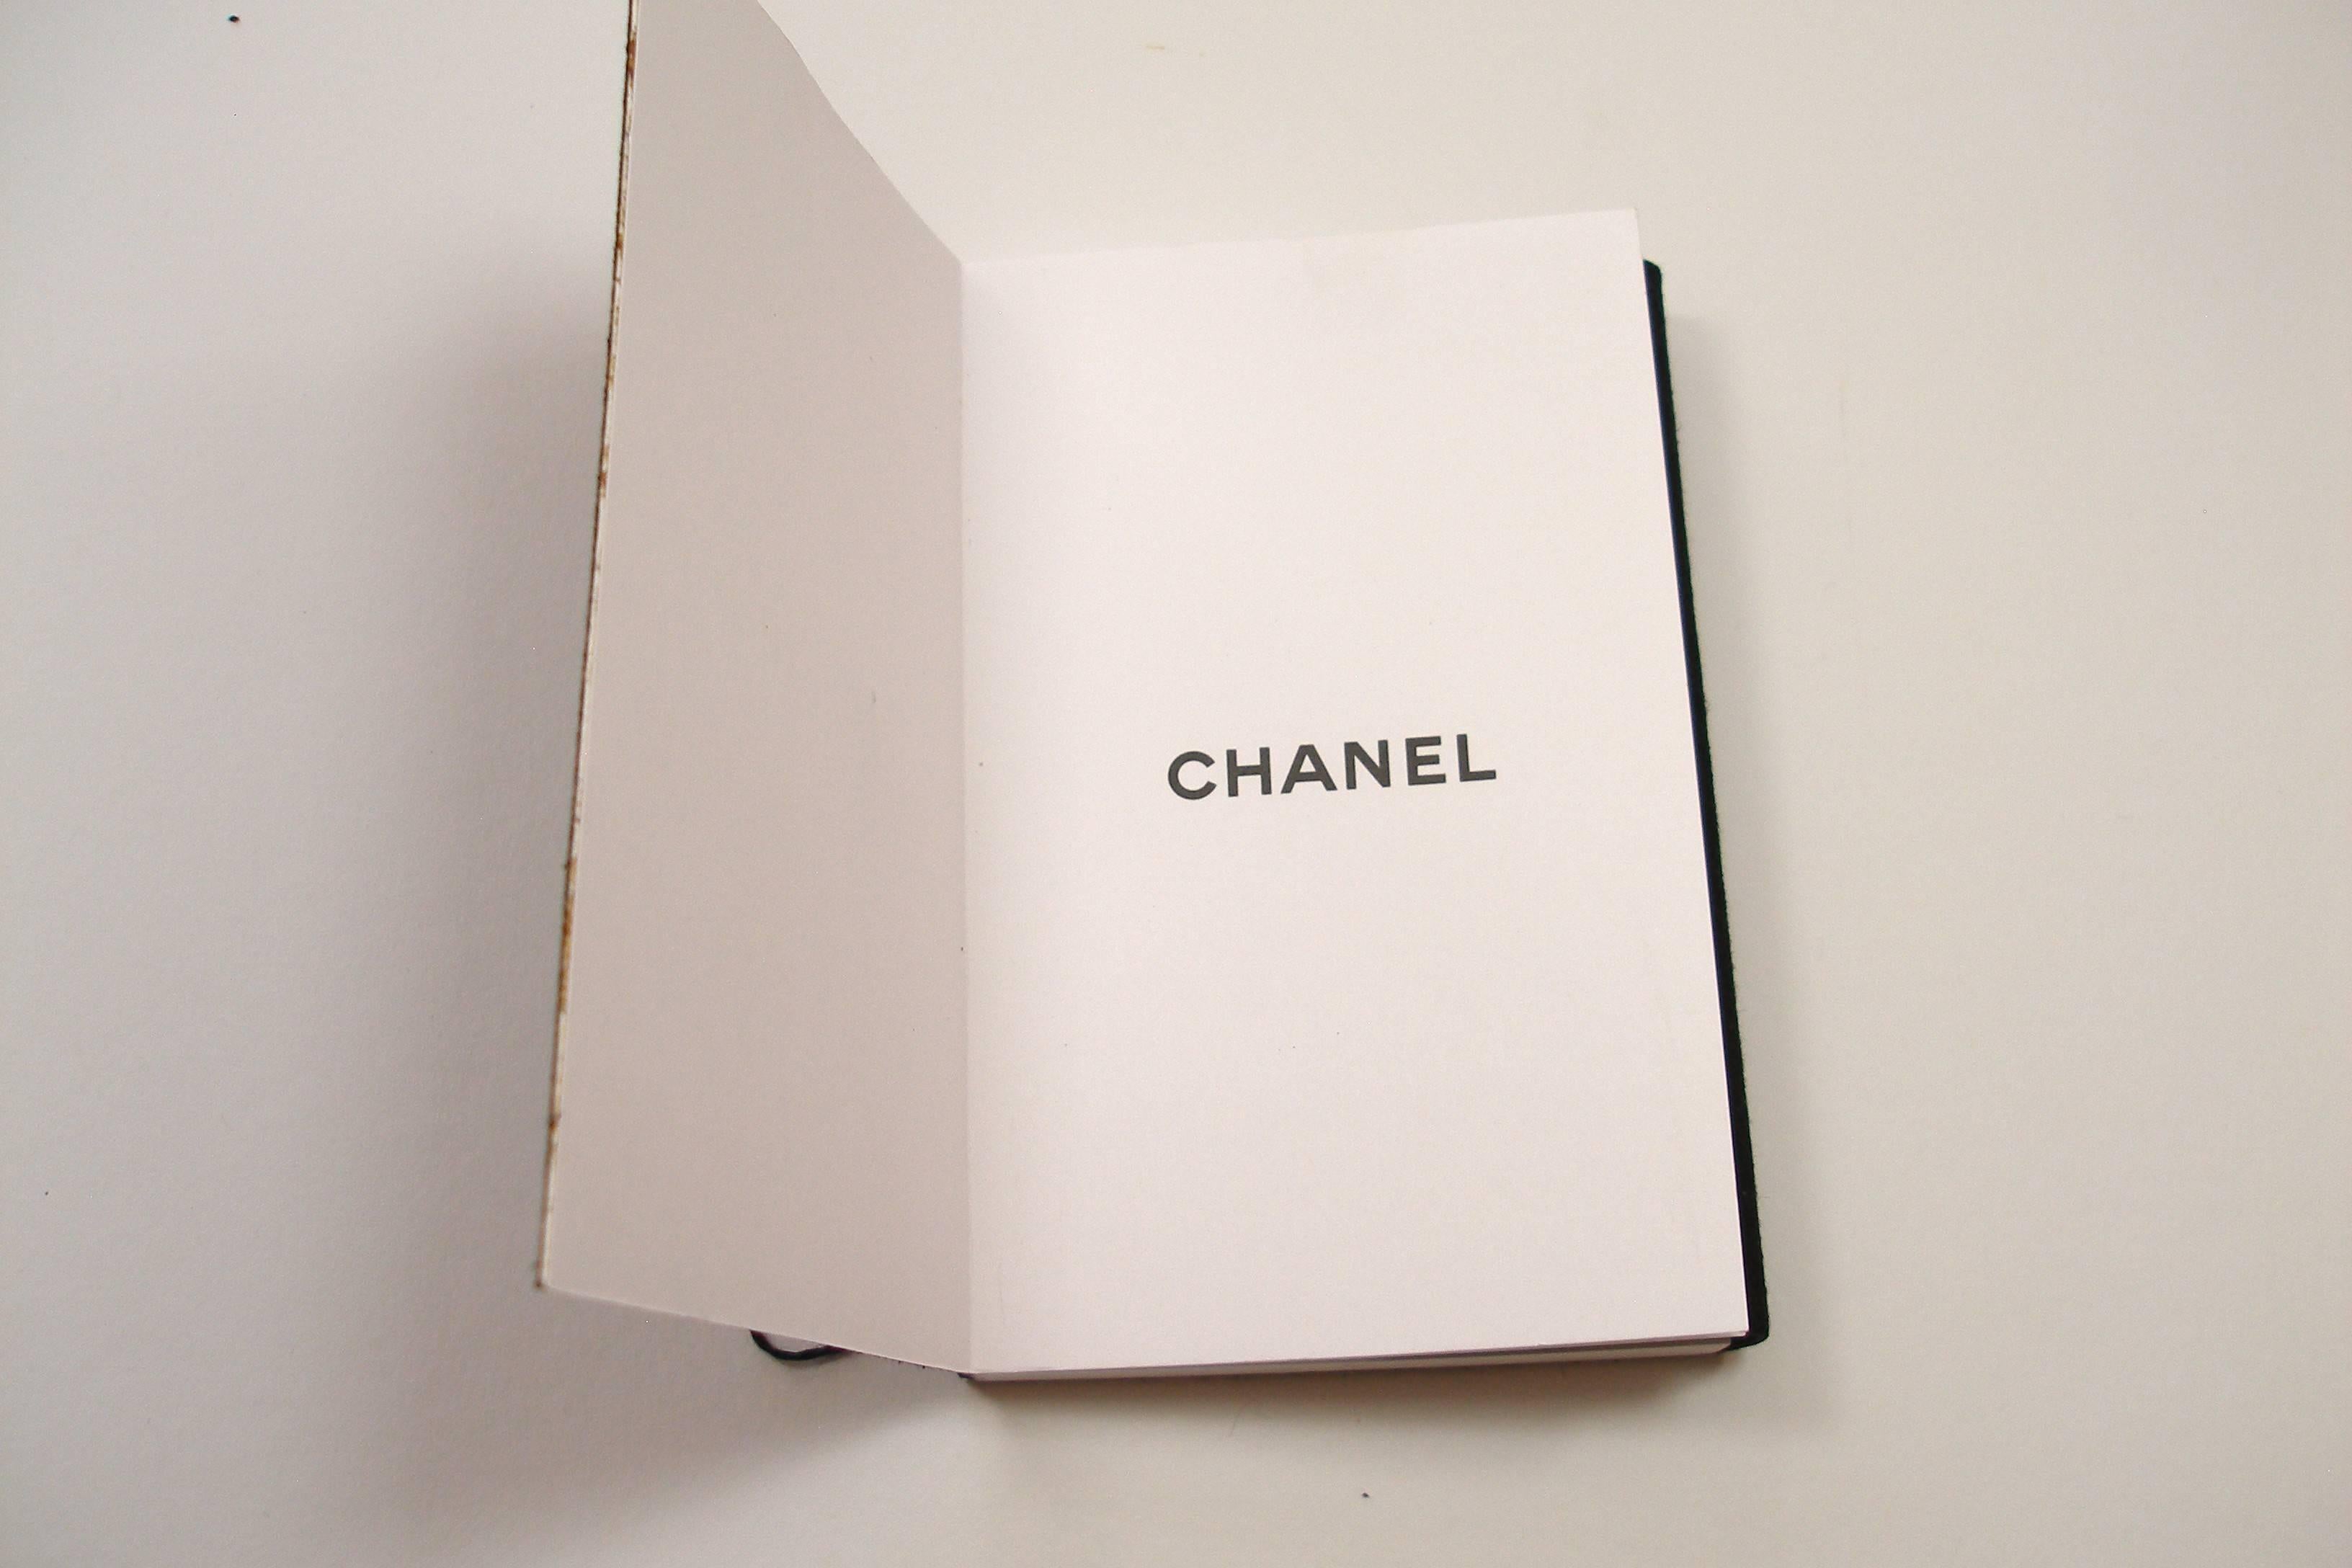 Chanel tends to give out some nice gifts to their VIP clients but I think this is one of the nicest !
NOTE BOOK 
Velvet note book cover
CHANEL is listed on the first page only
The other pages are white in color 
Size : 8 X 12 X 1 cm
Sorry no box